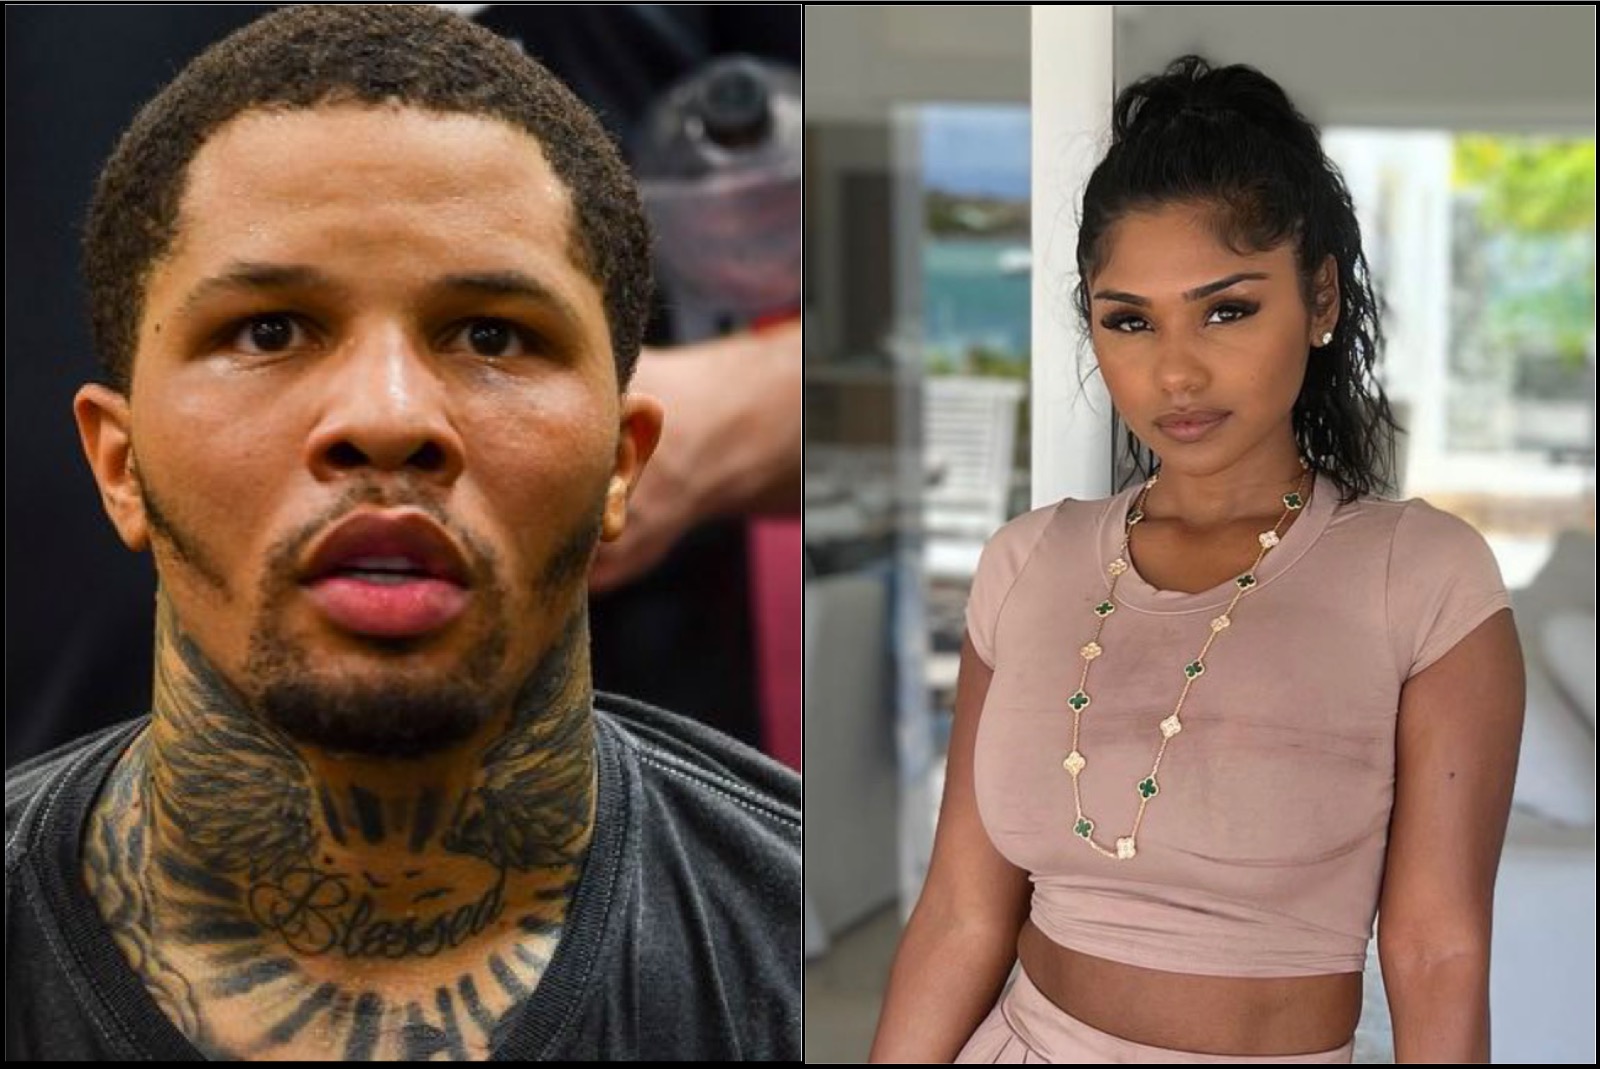 Gervonta Davis’ Baby Mama Vanessa Posso Says They Were Both Responsible For Their Fight Leading to His Arrest